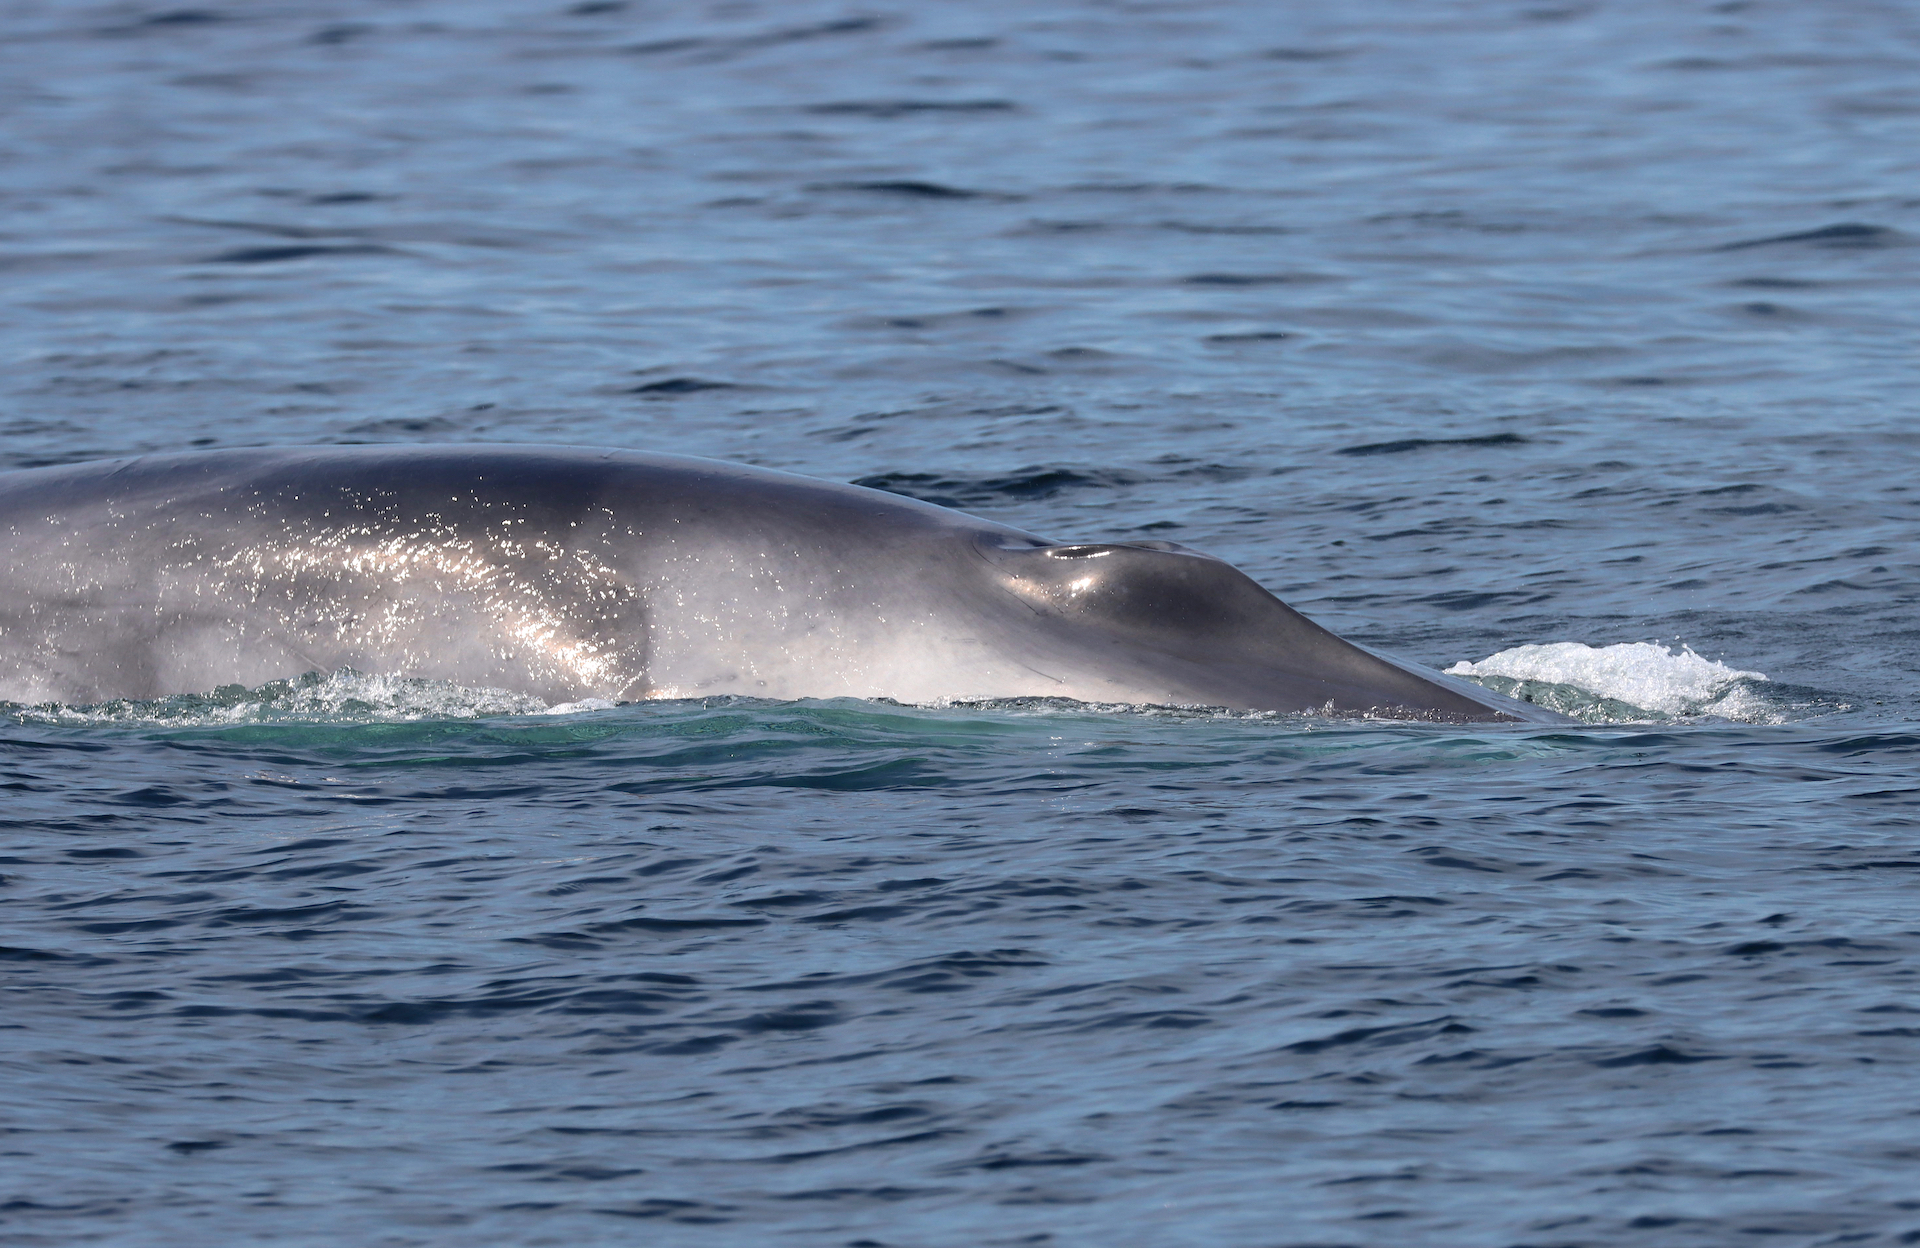 Fin whale seen by Hebridean Adventures guests